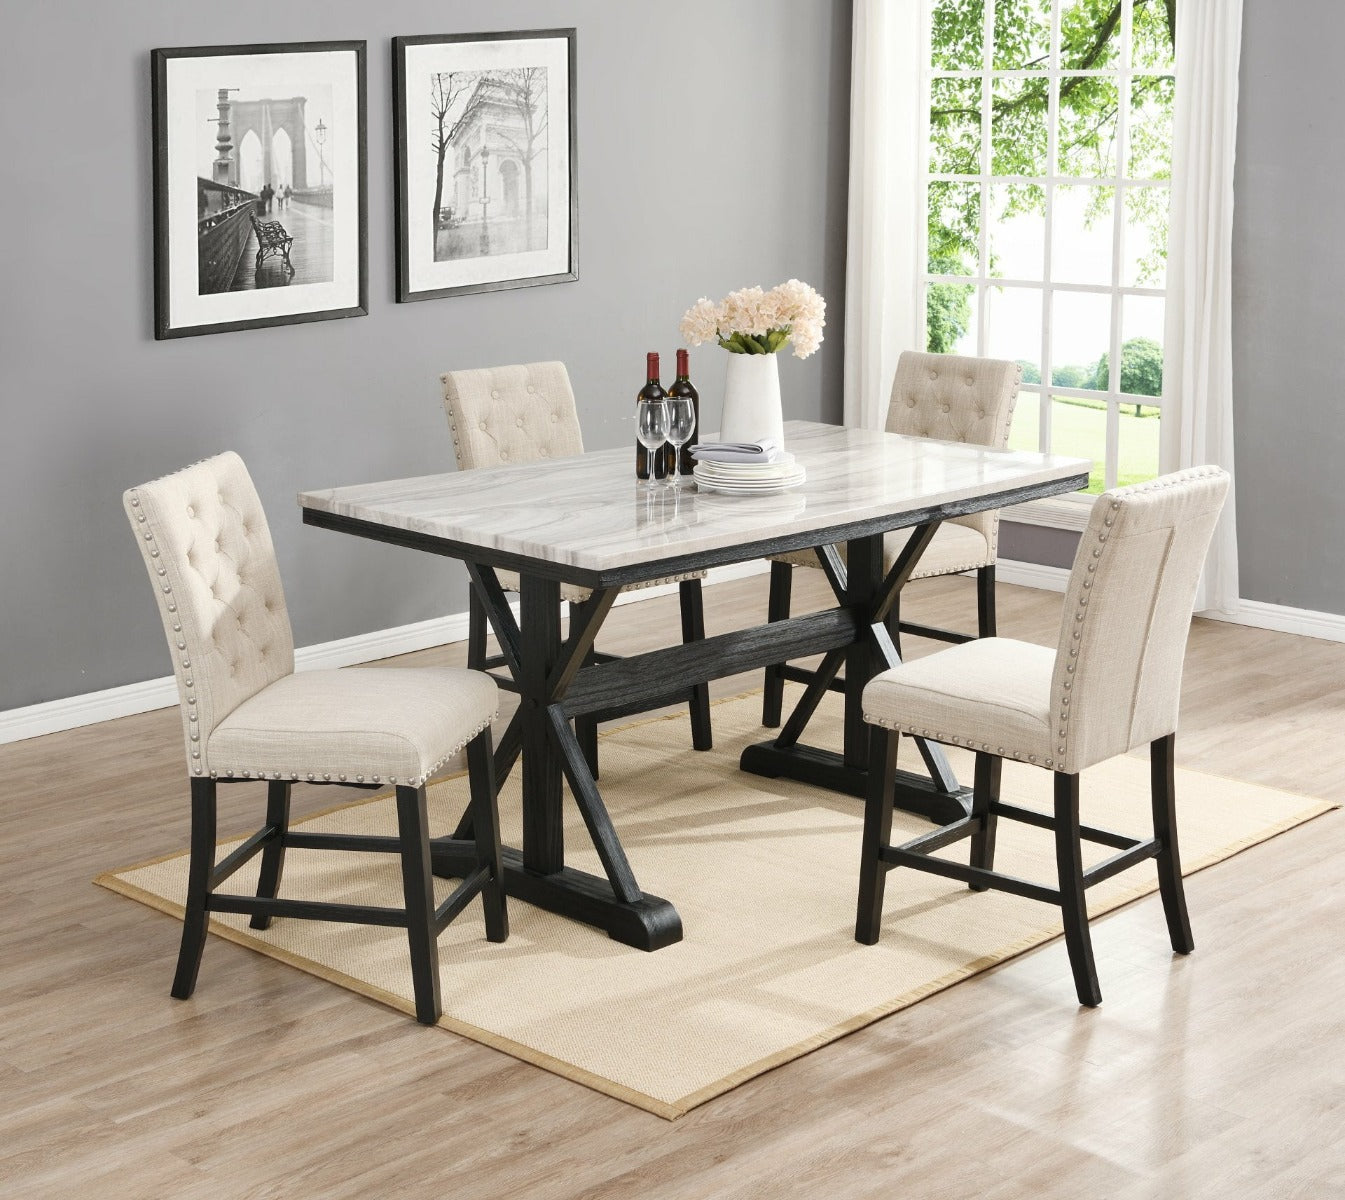 Chino 6 Pc Dining Set - Beige Linen Chairs